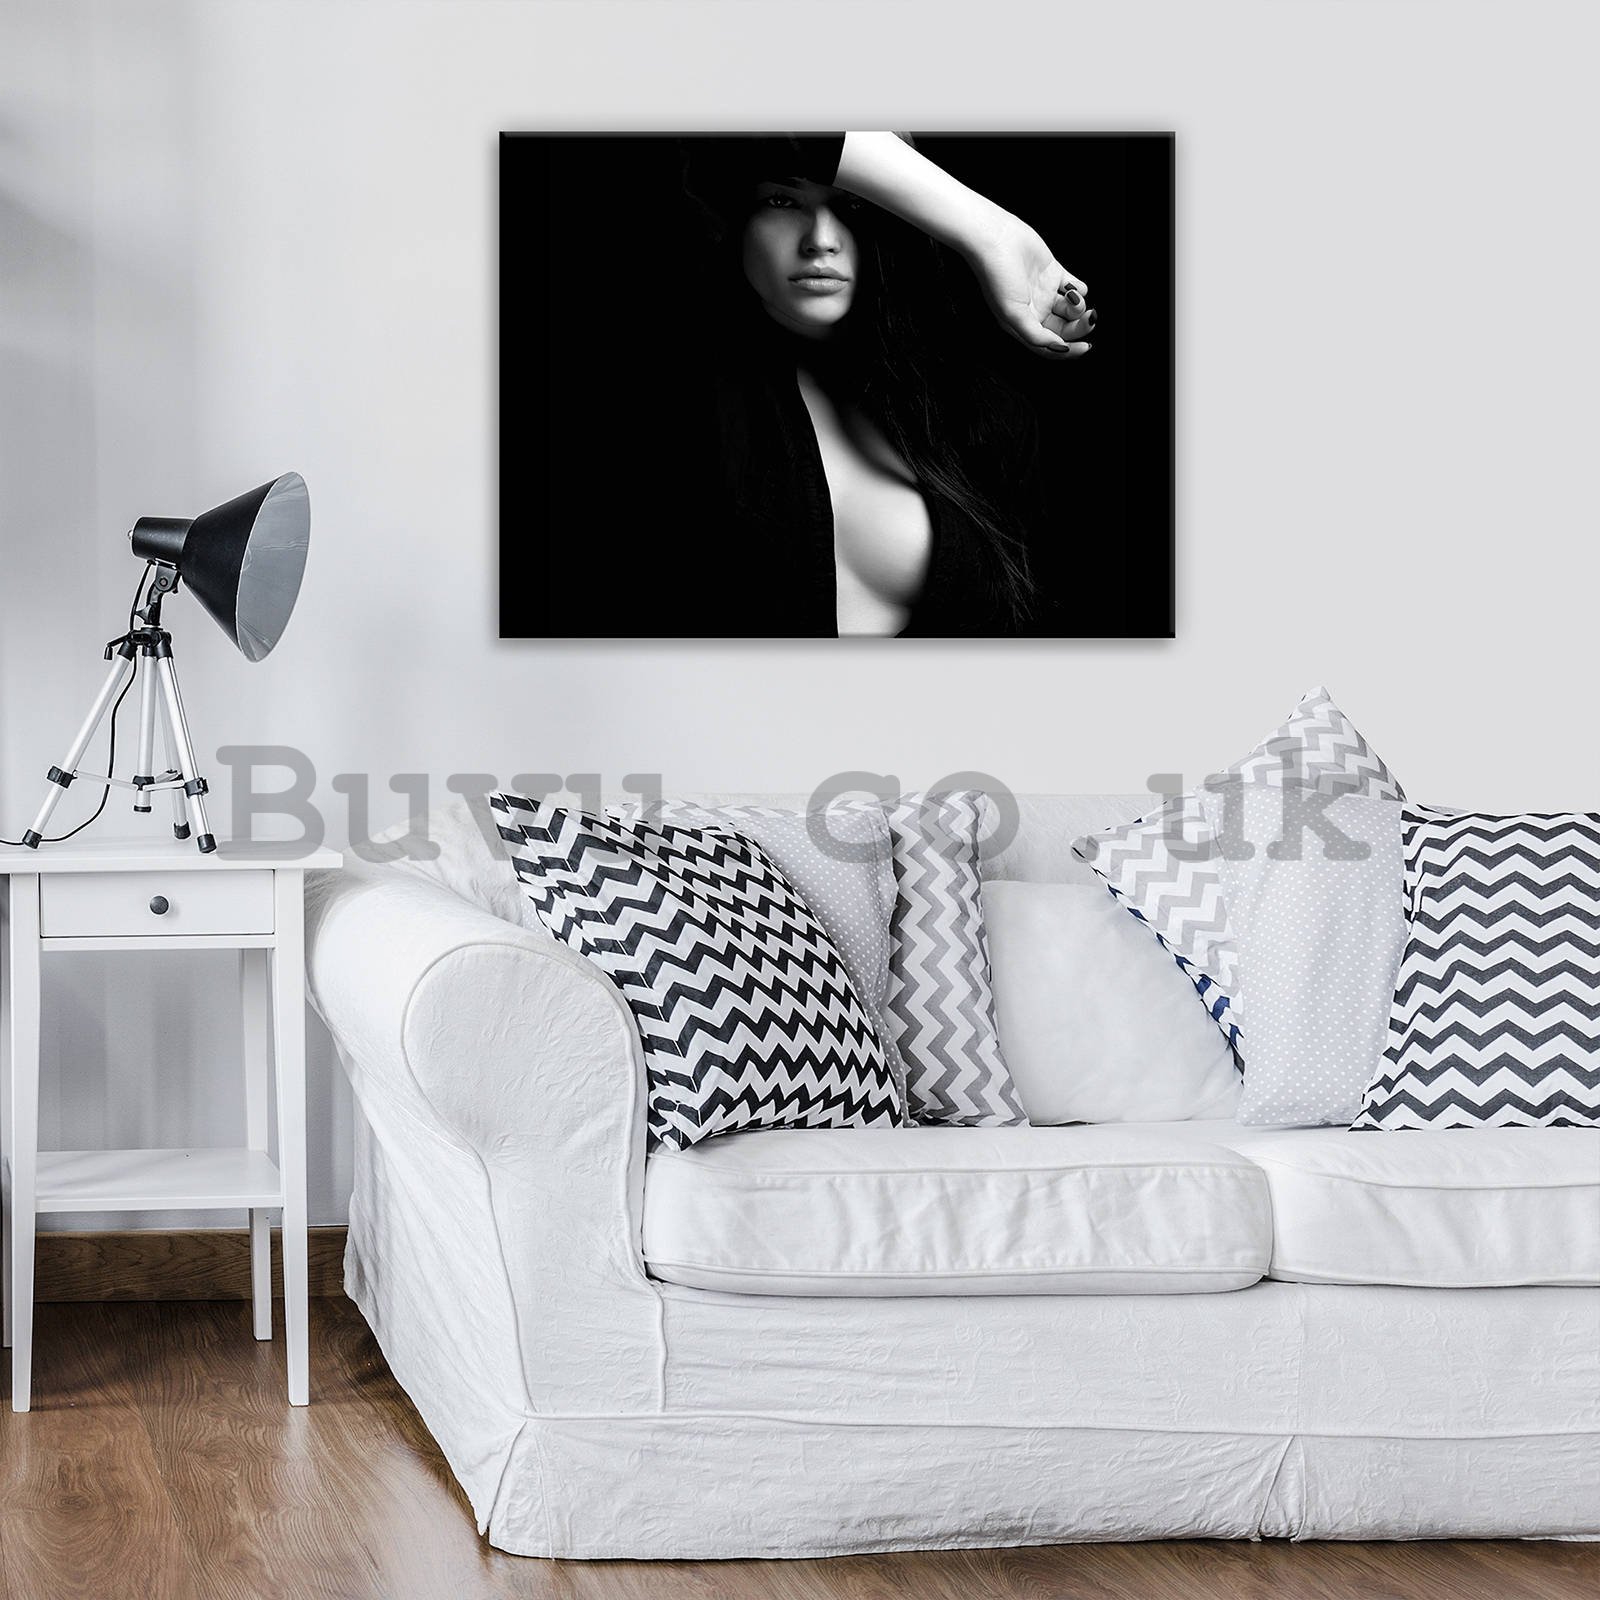 Painting on canvas: Mysterious Woman (3) - 80x60 cm